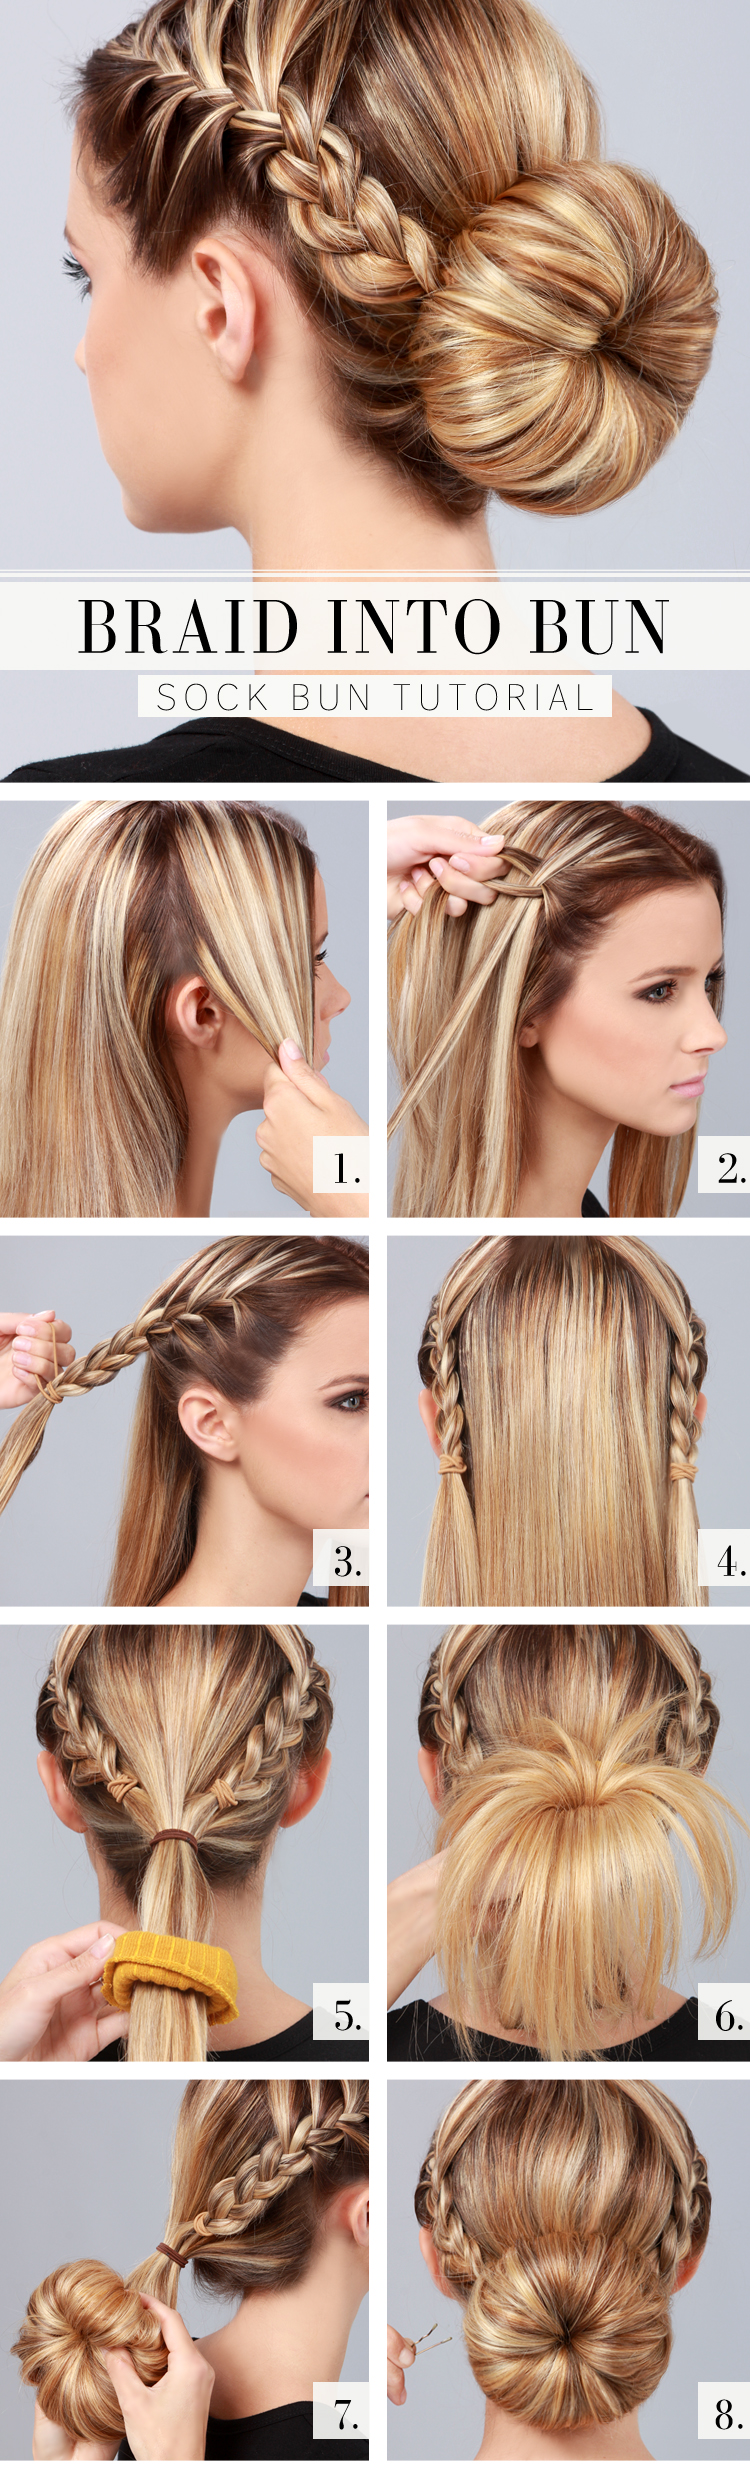 Hairstyle Tutorials for Every Occasion